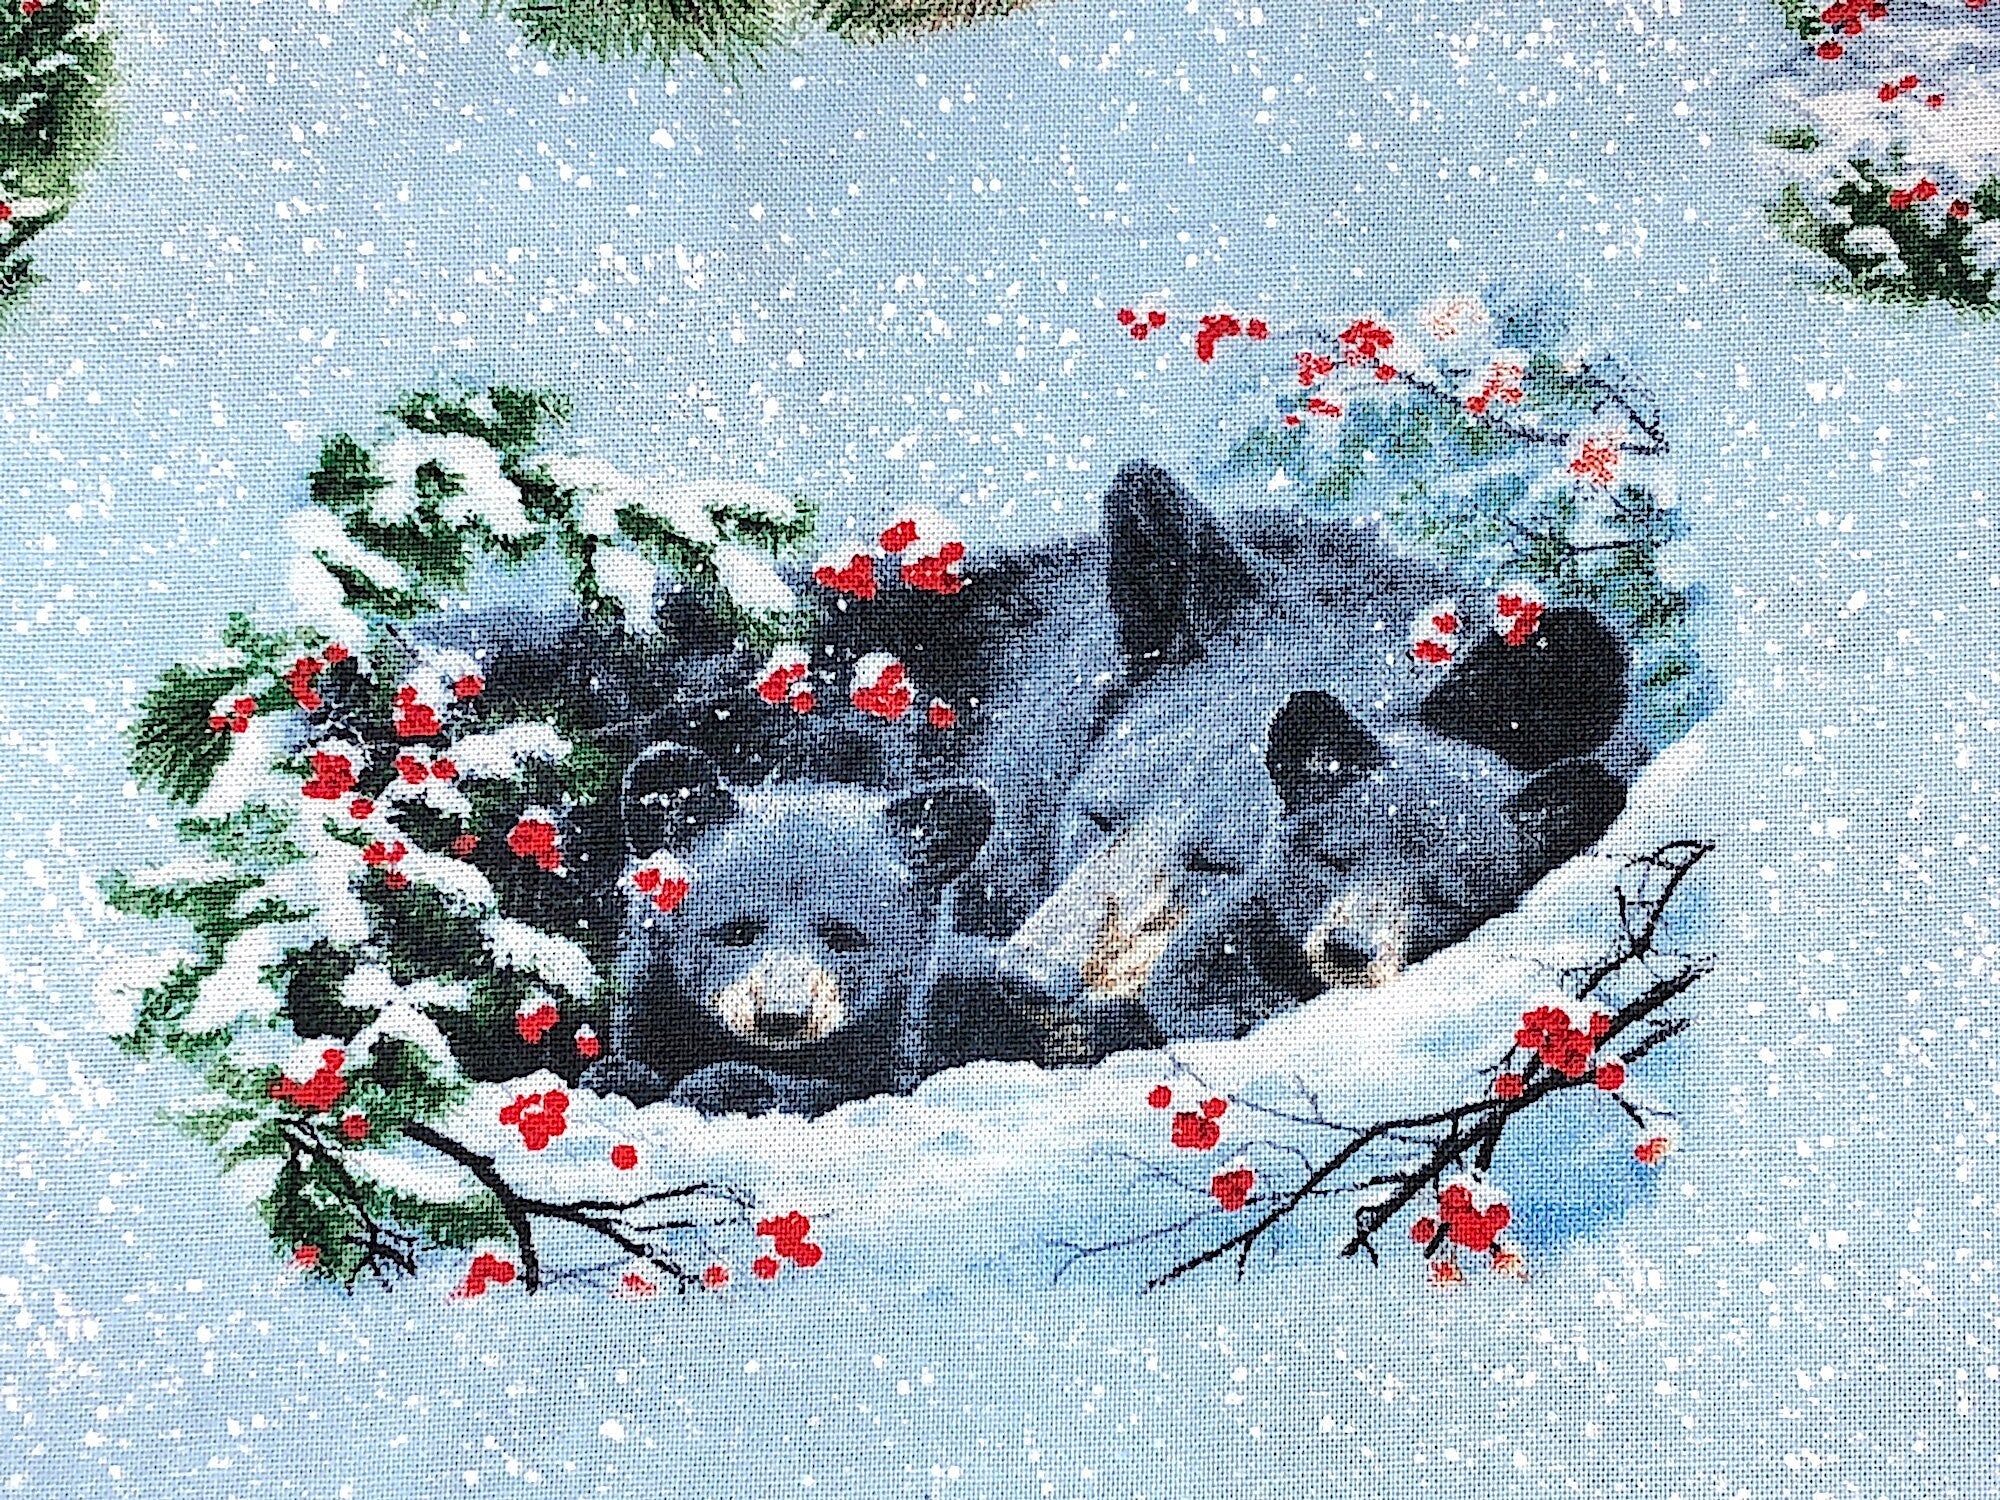 Close up of 3 bears sleeping in the snow.